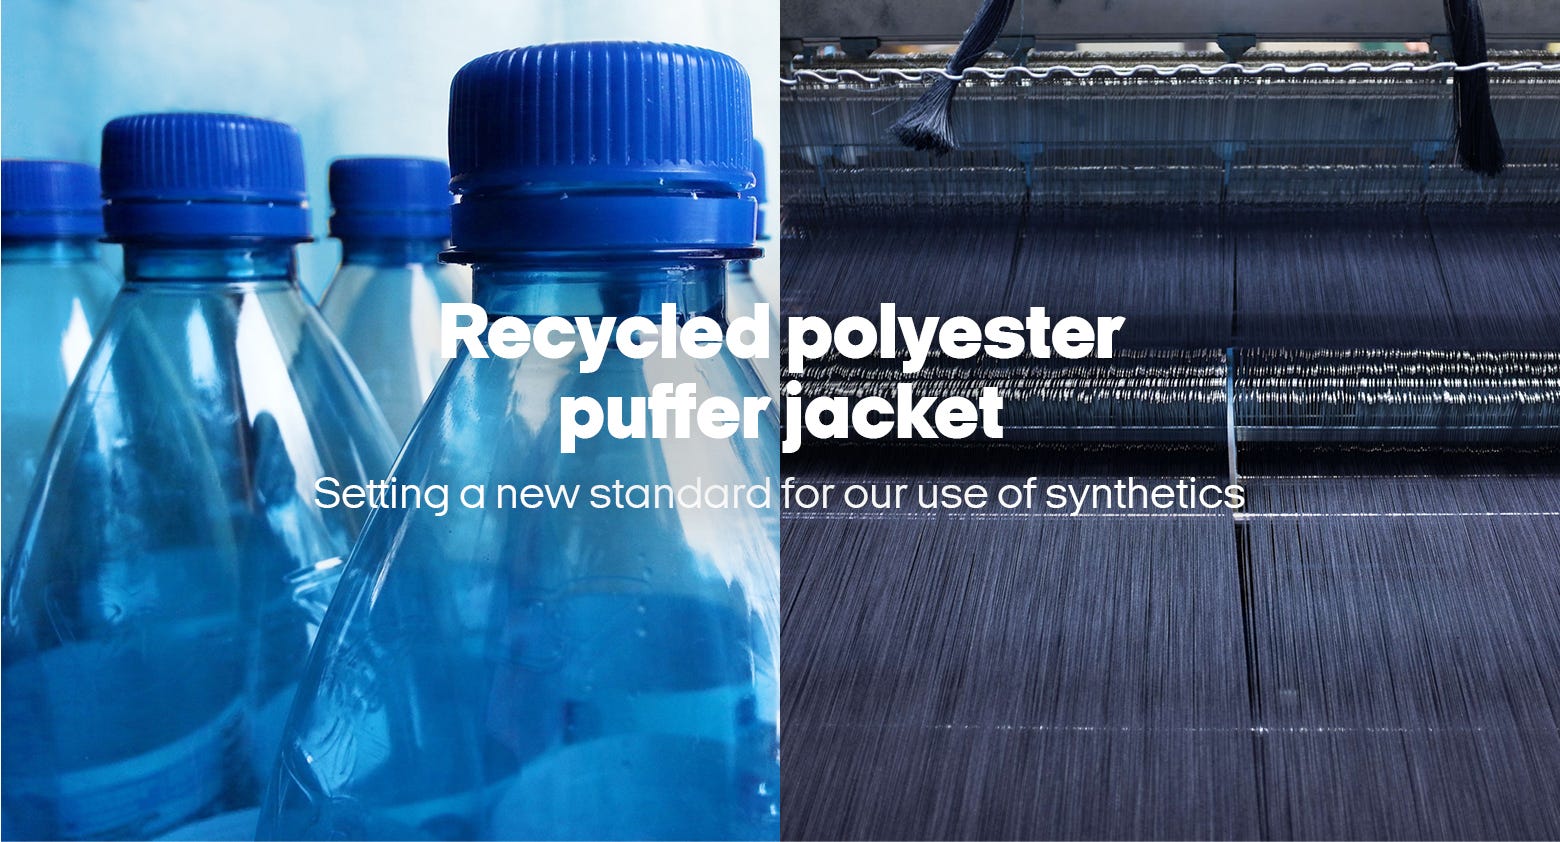 Recycled polyester puffer jackets | Jack & Jones